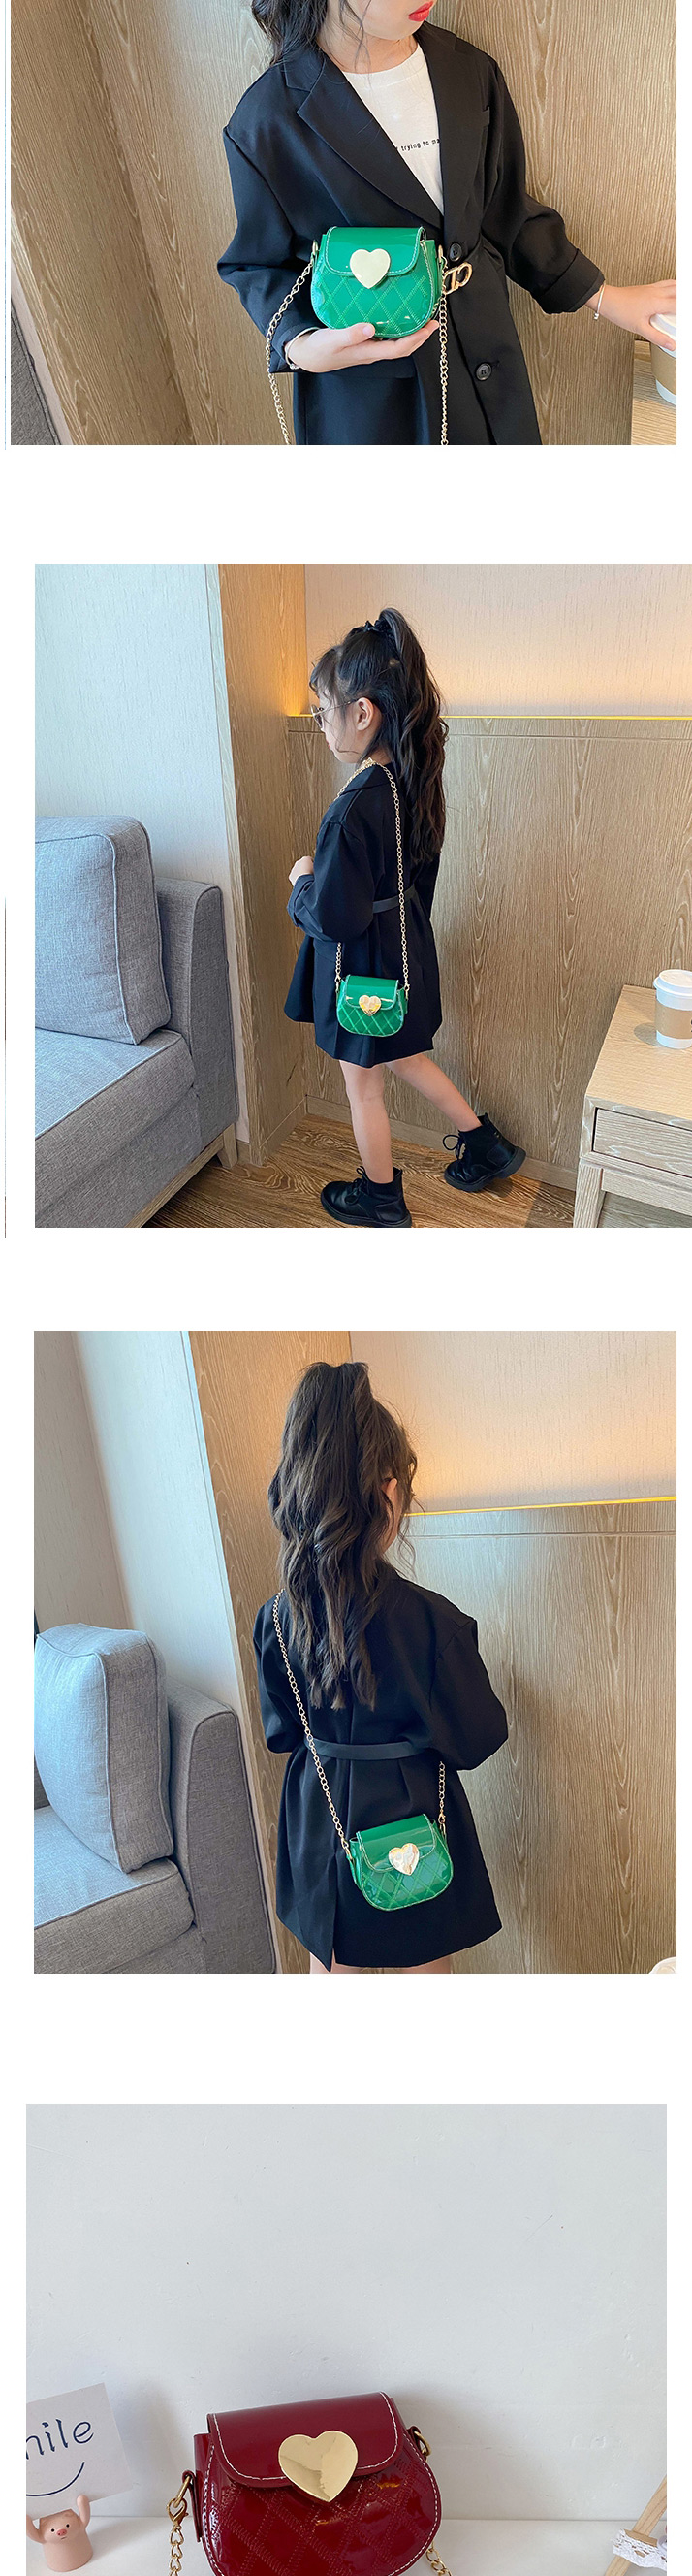 Fashion Green Childrens One-shoulder Diagonal Bag With Chain Love Lock,Shoulder bags